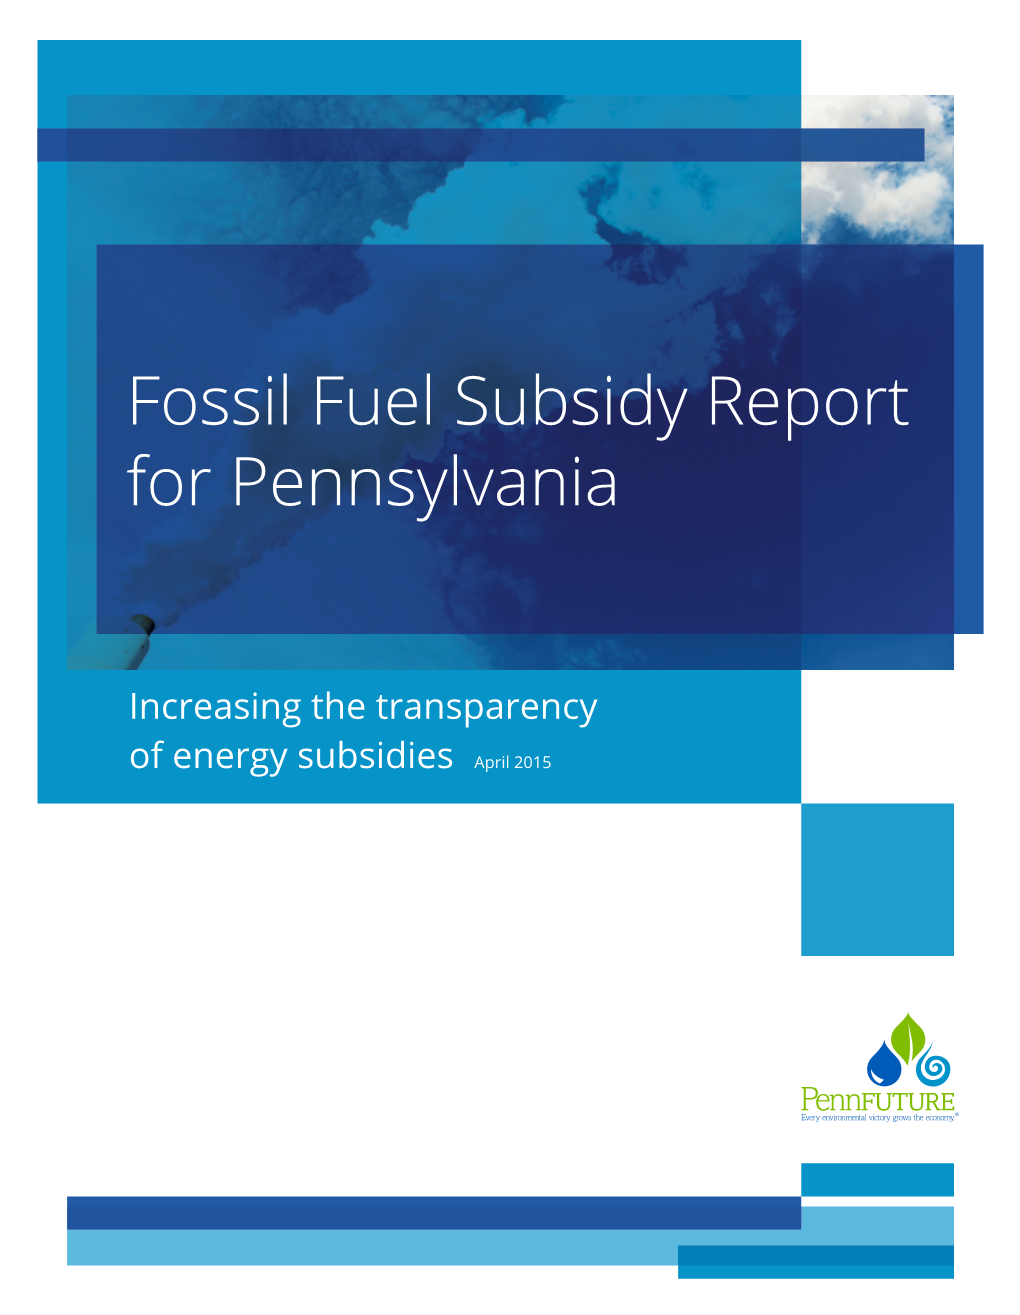 Fossil Fuel Subsidy Report for Pennsylvania